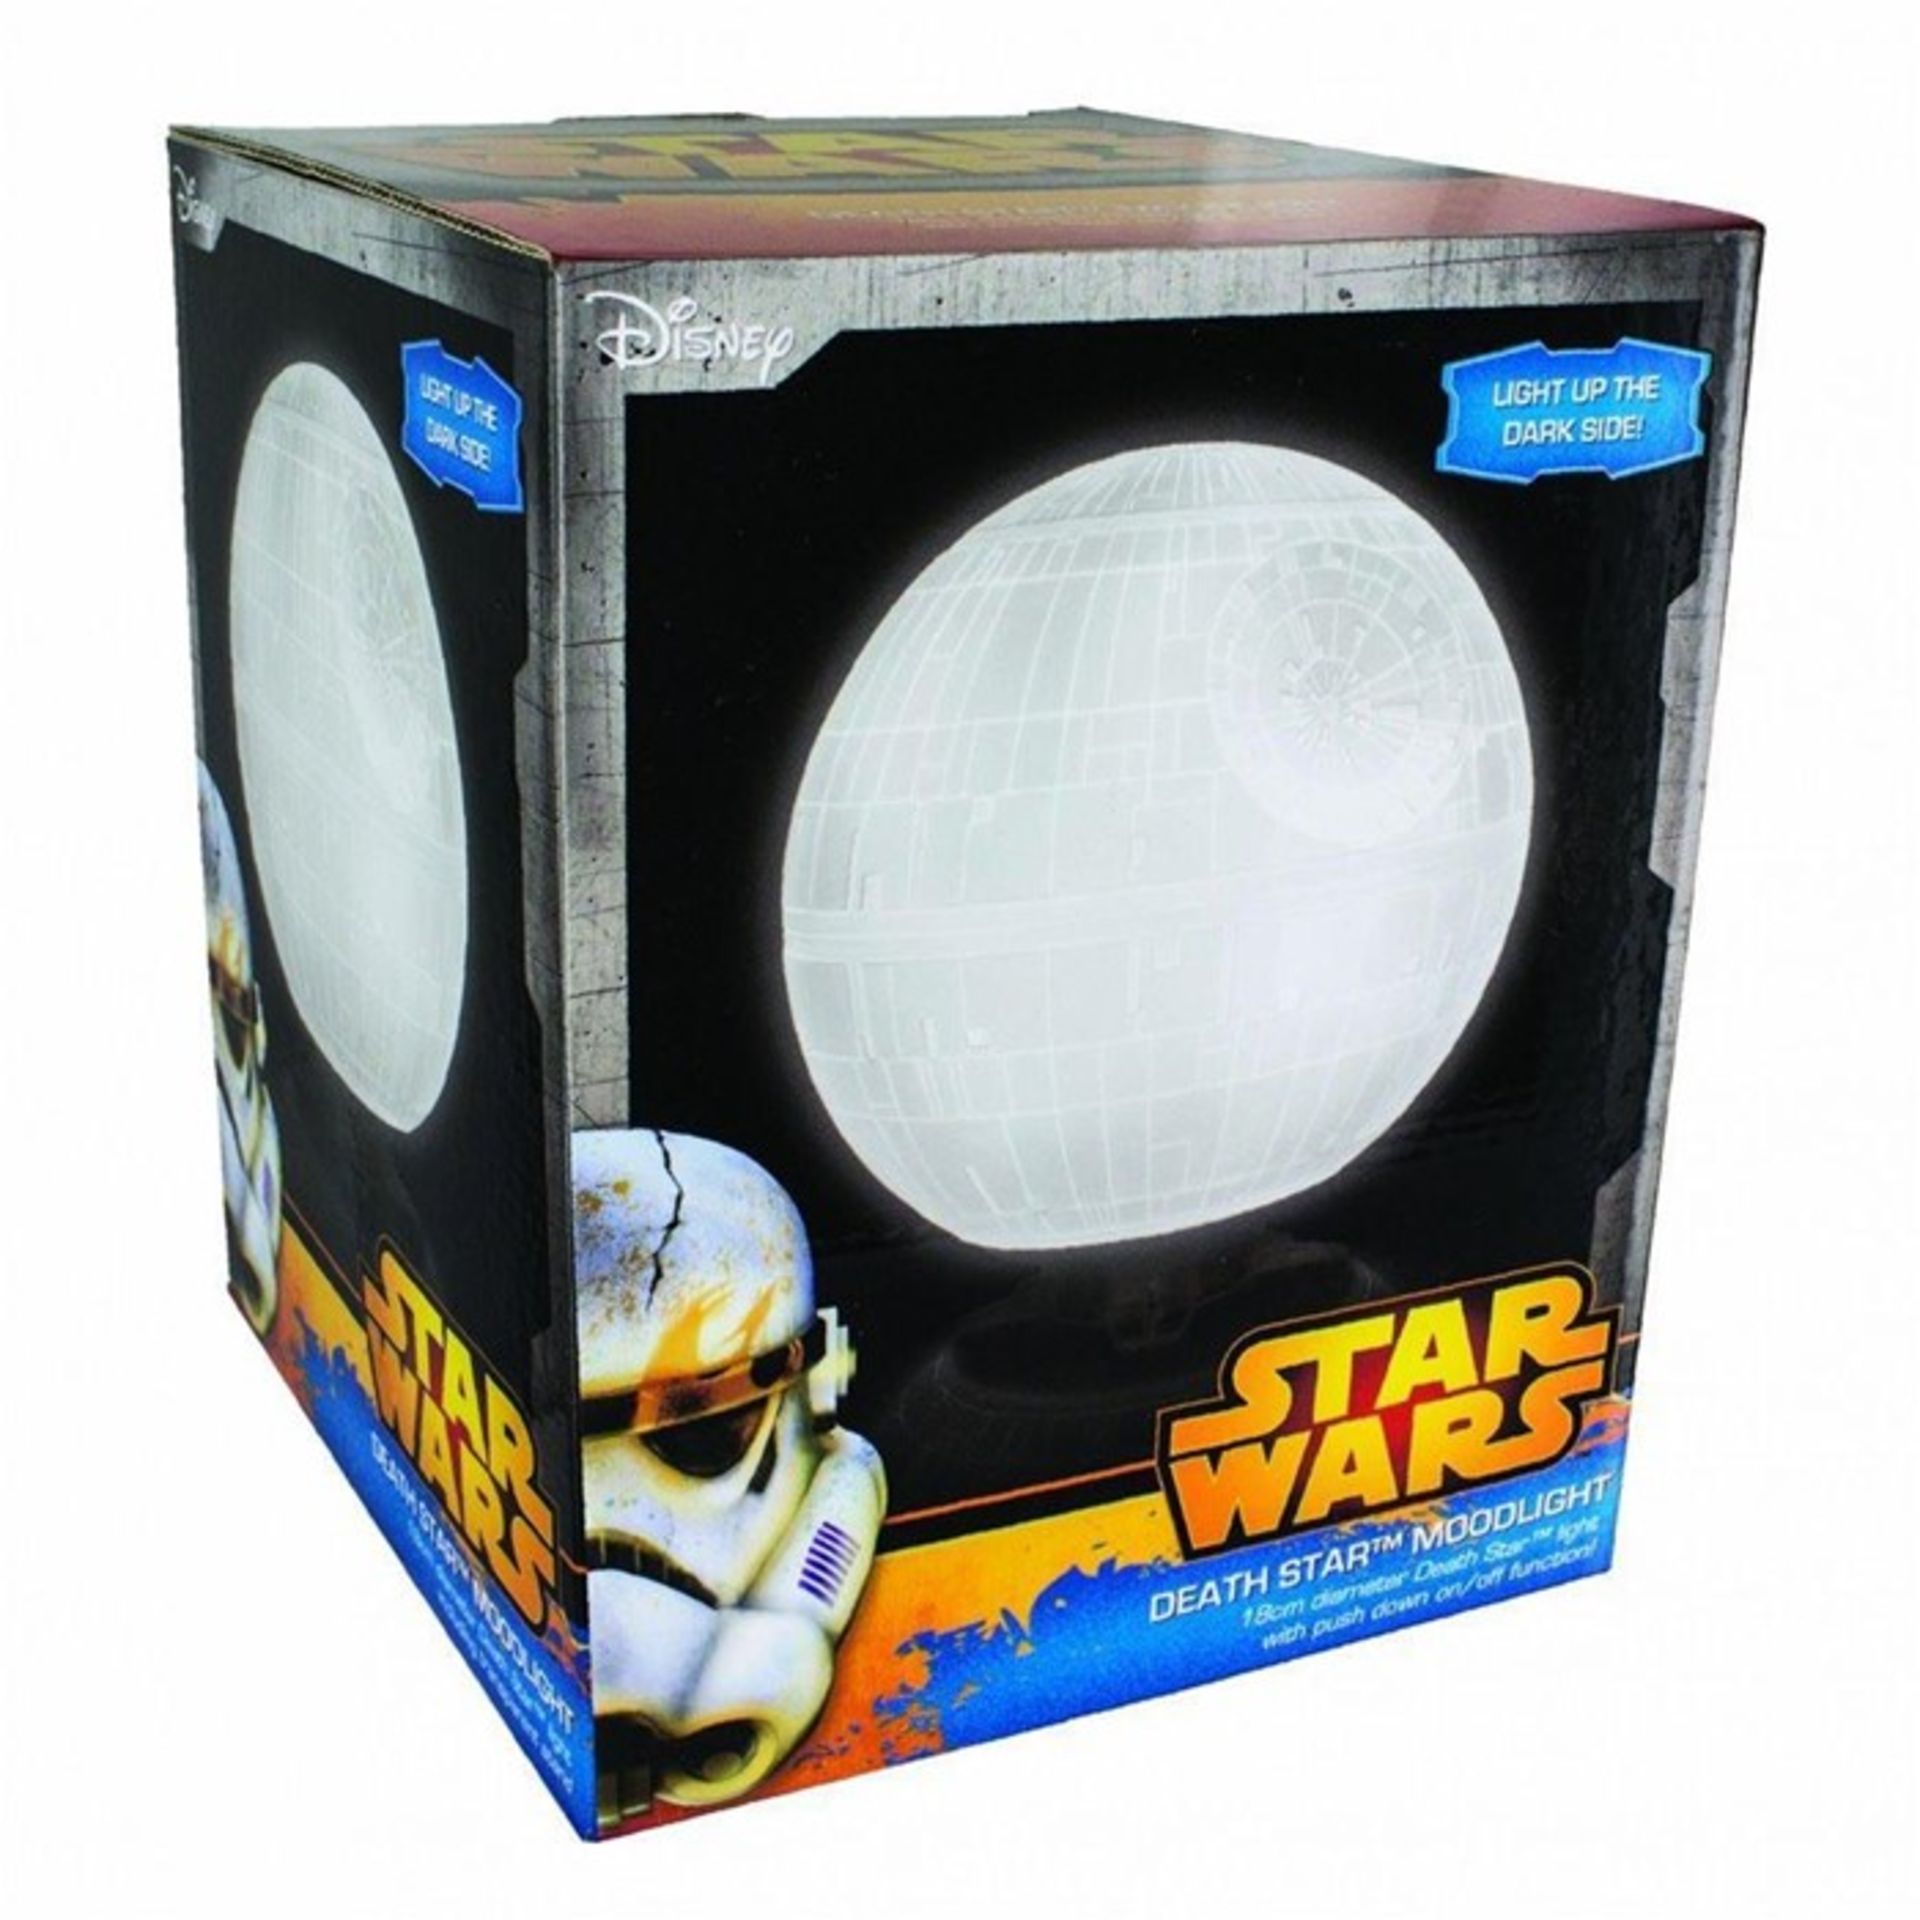 1 BOXED STAR WARS DEATH STAR MOODLIGHT / RRP £16.99 (PUBLIC VIEWING AVAILABLE)